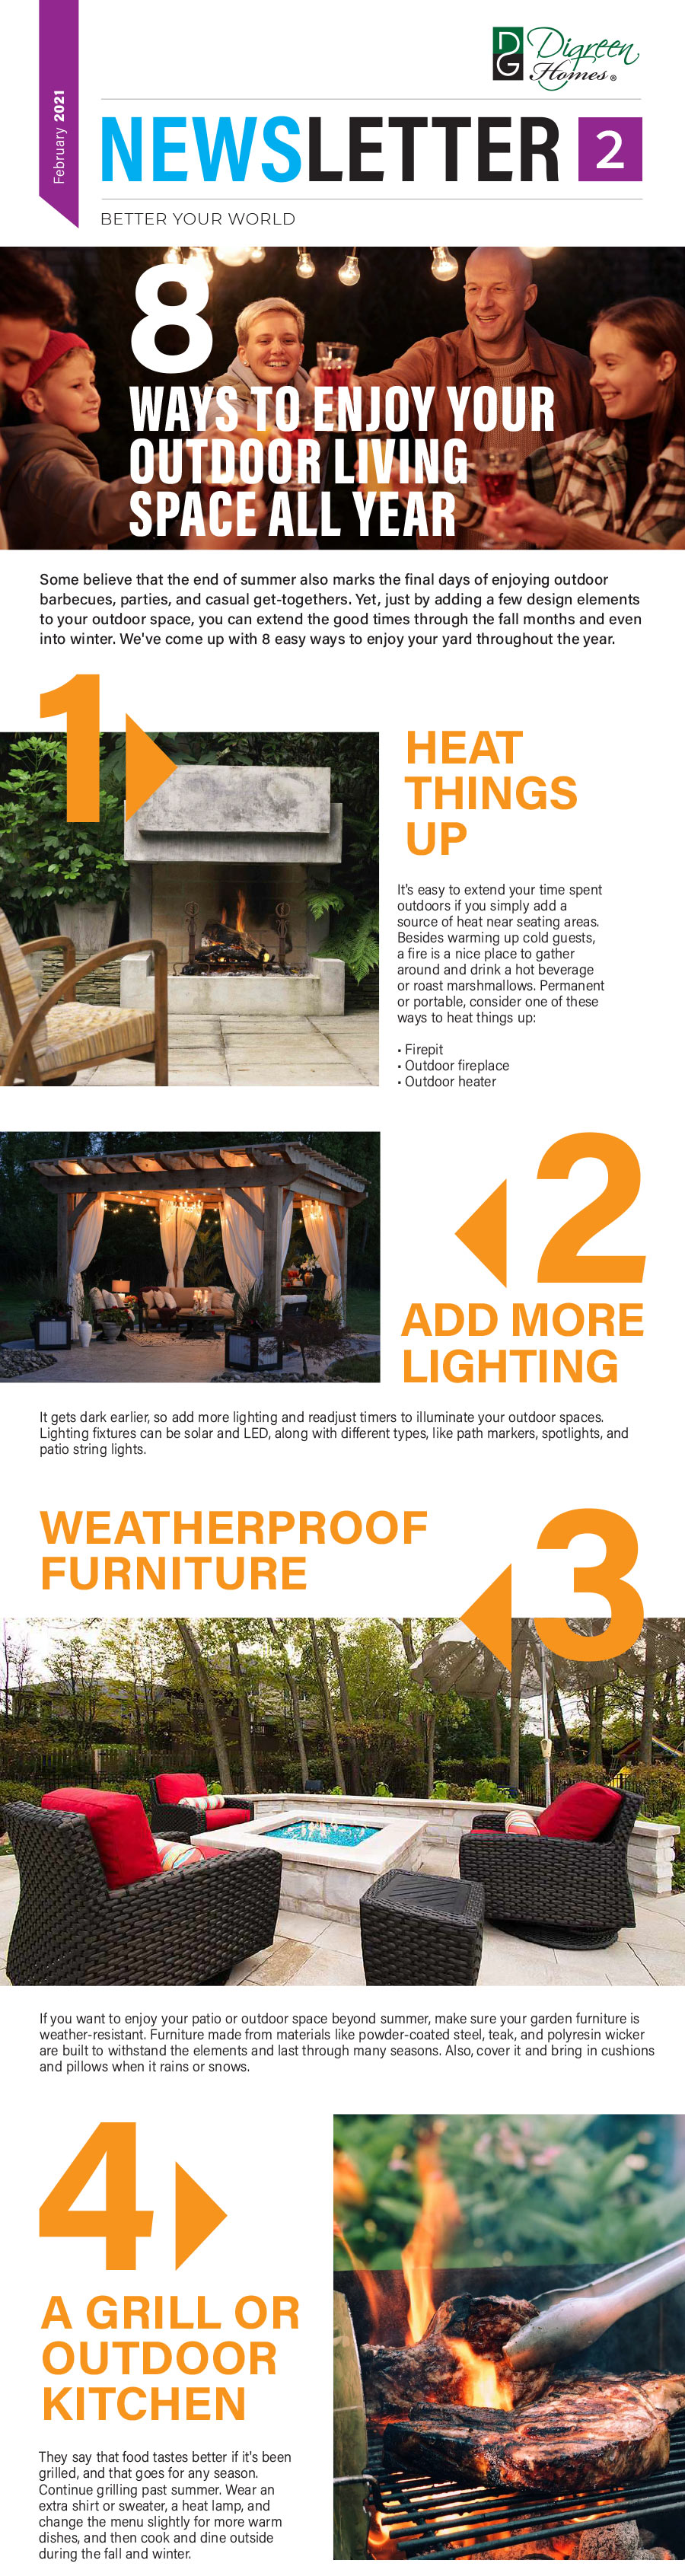 8 WAYS TO ENJOY YOUR OUTDOOR LIVING SPACE ALL YEAR.